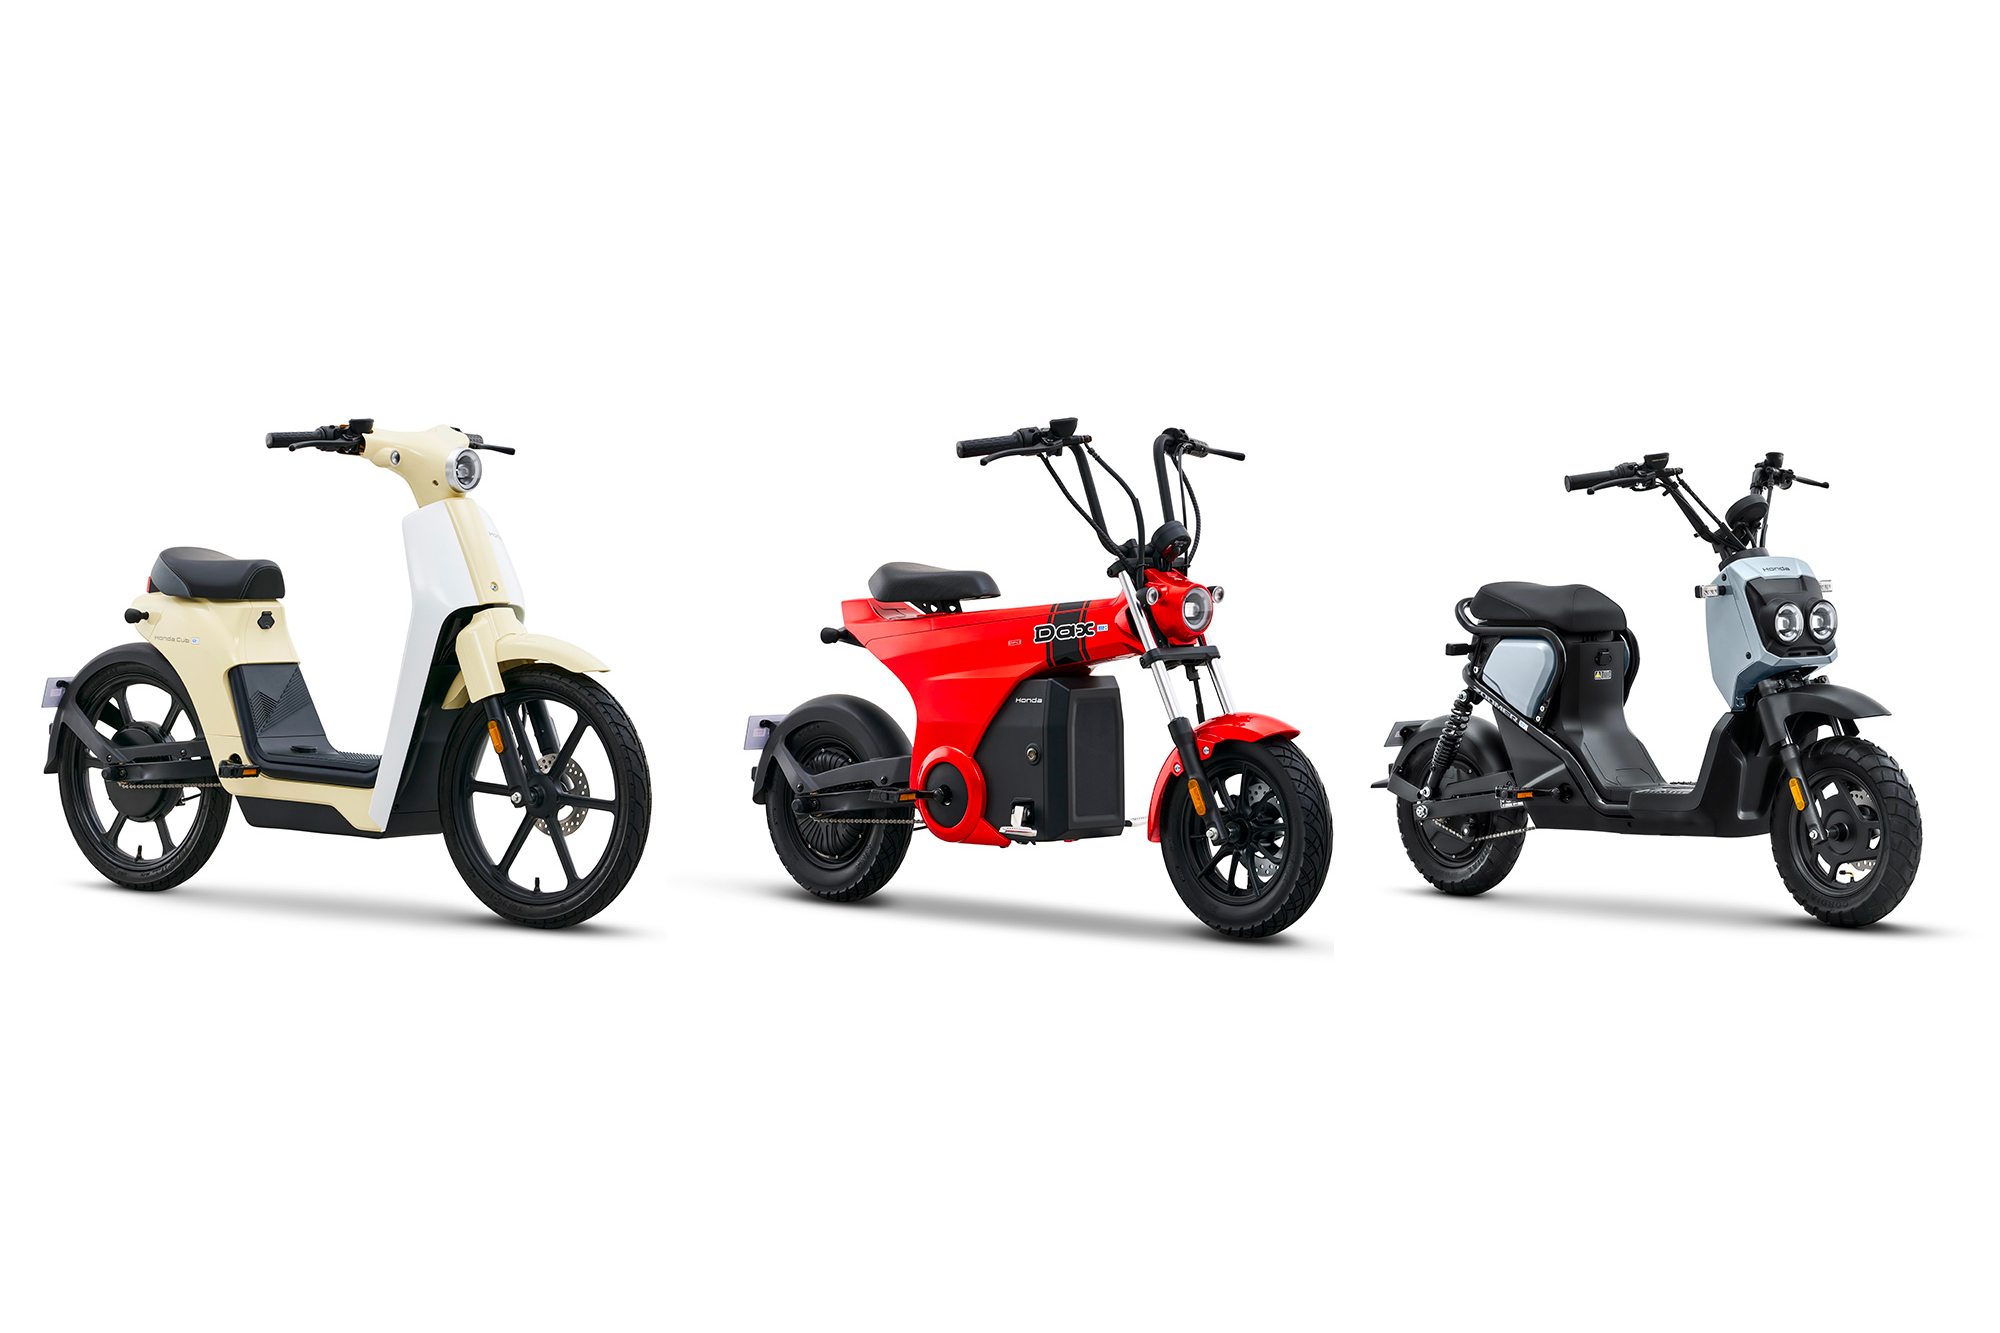 Cub, Dax, and Zoomer reprised as retro scooters for China